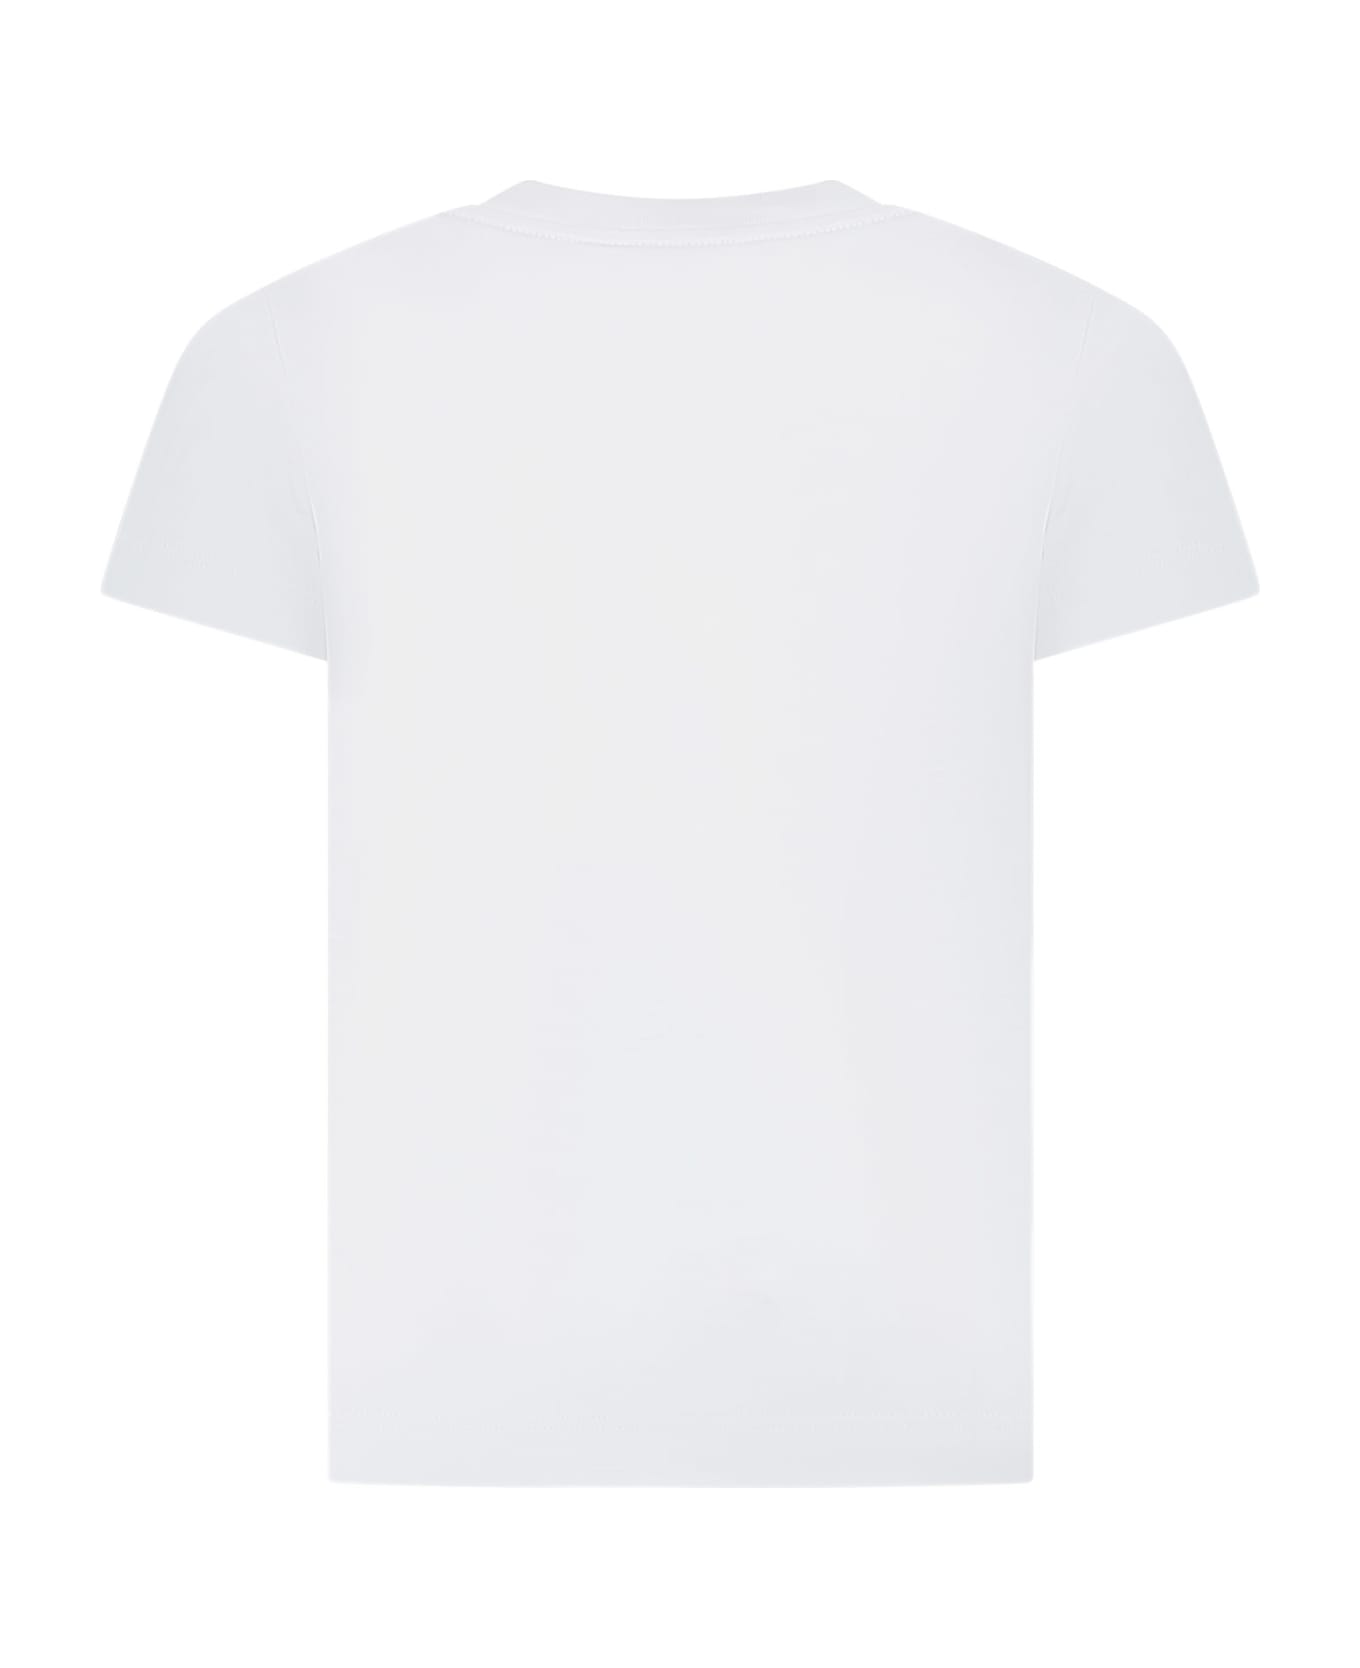 Fendi White T-shirt For Girl With Iconic Ff - WHITE